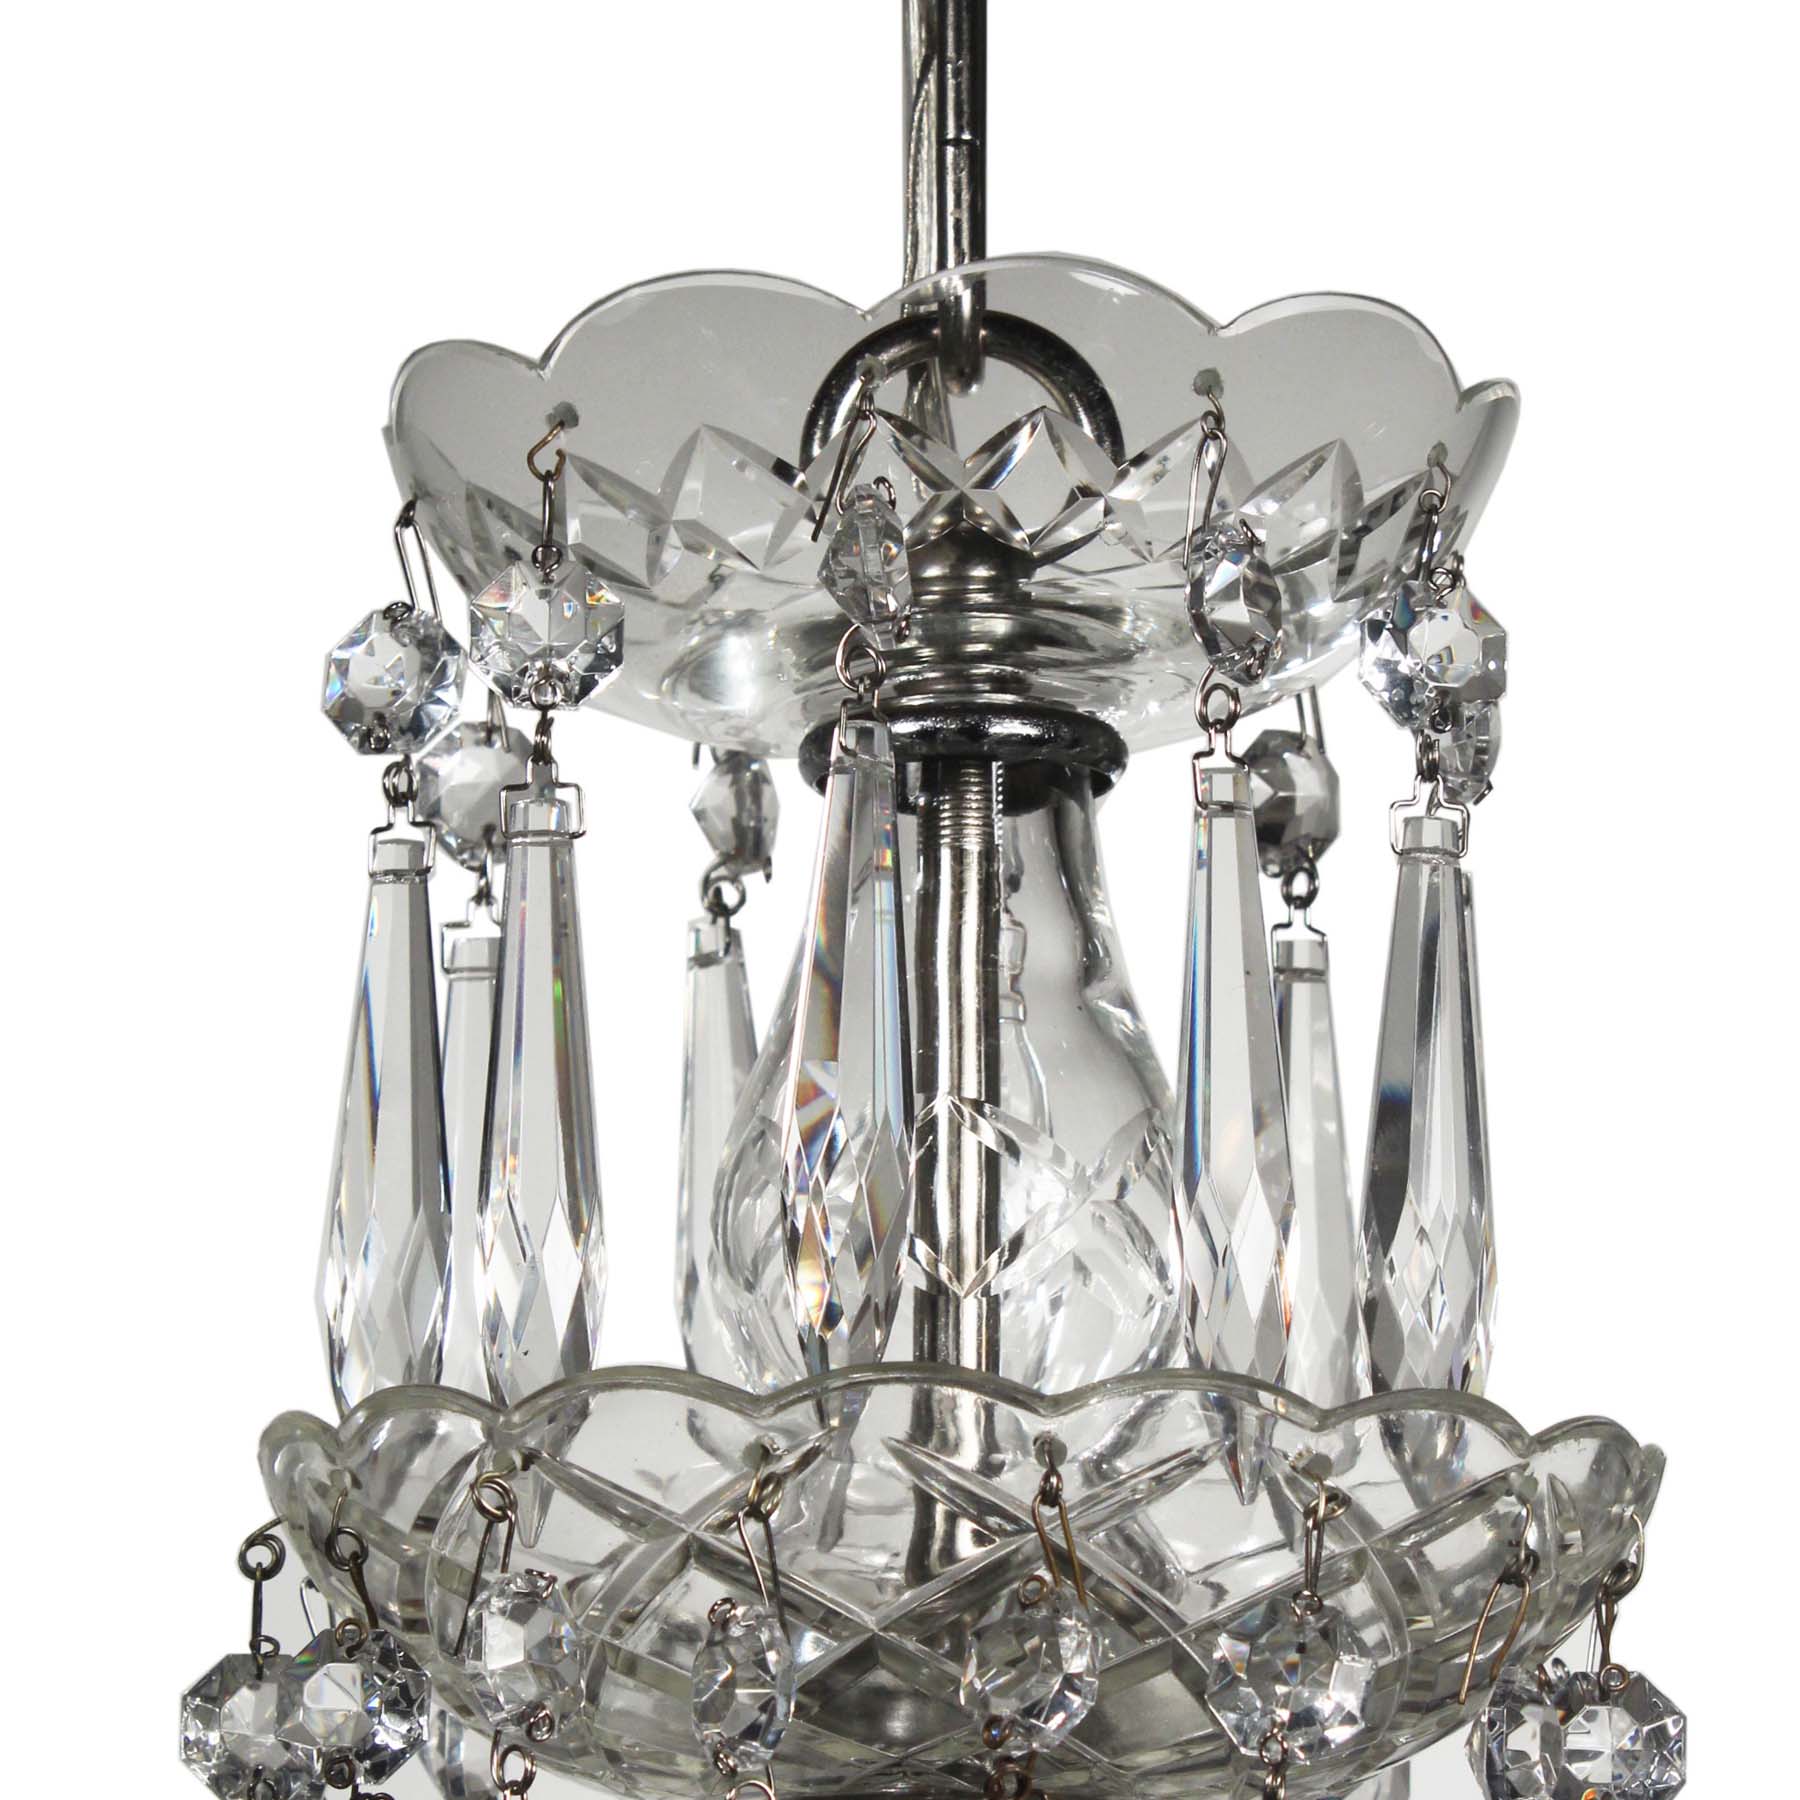 SOLD Five-Light Glass Chandelier with Prisms, Antique Lighting-67741